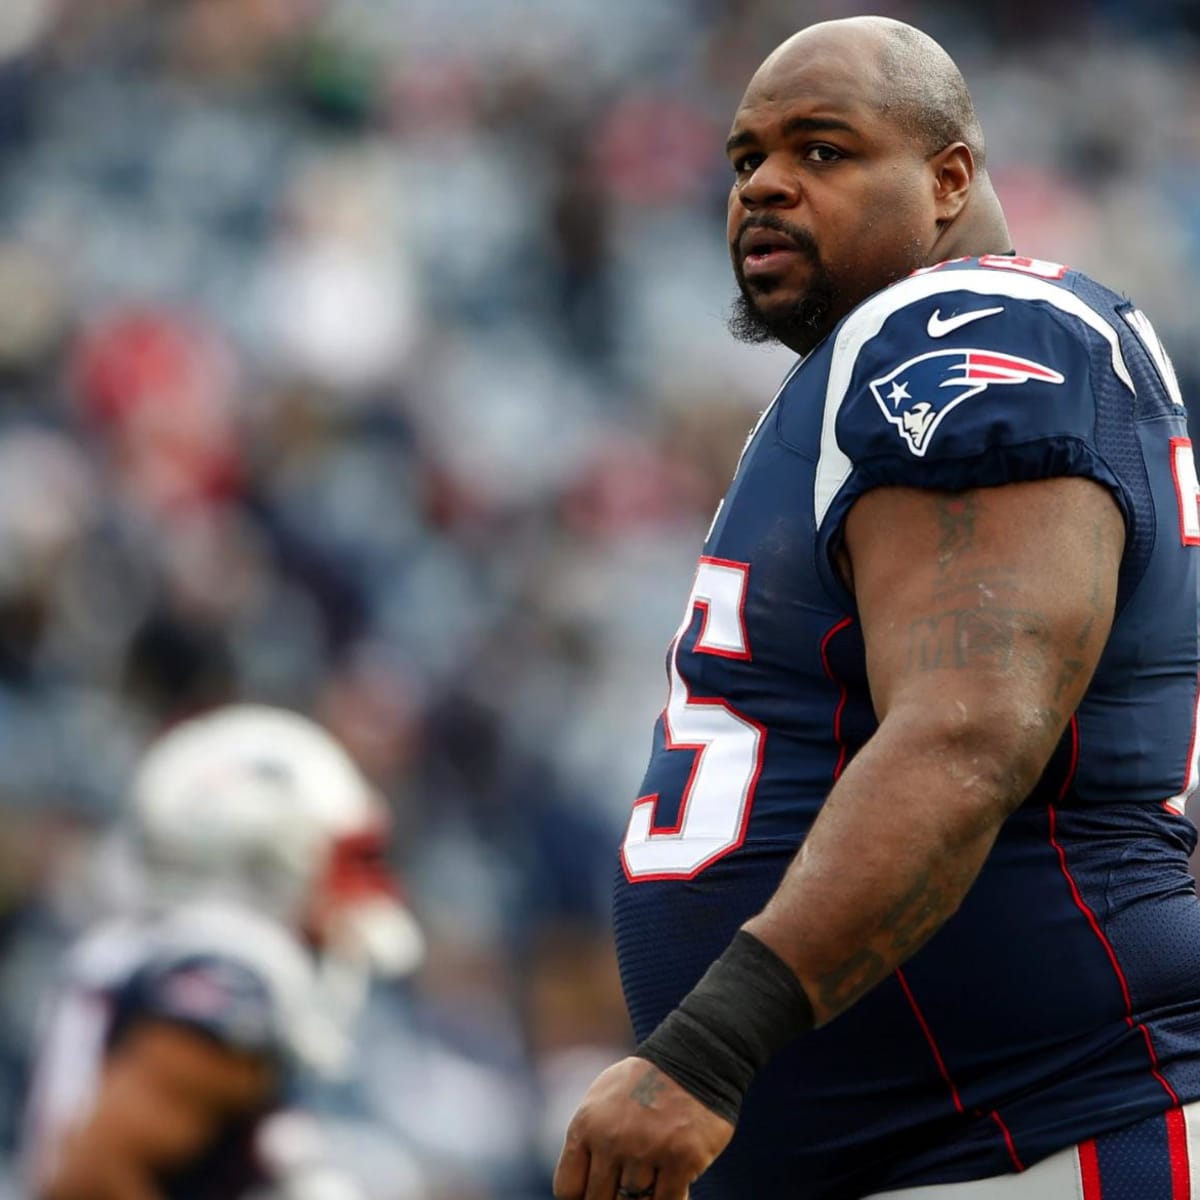 Vince Wilfork leads the way for revived Patriots defense - NBC Sports